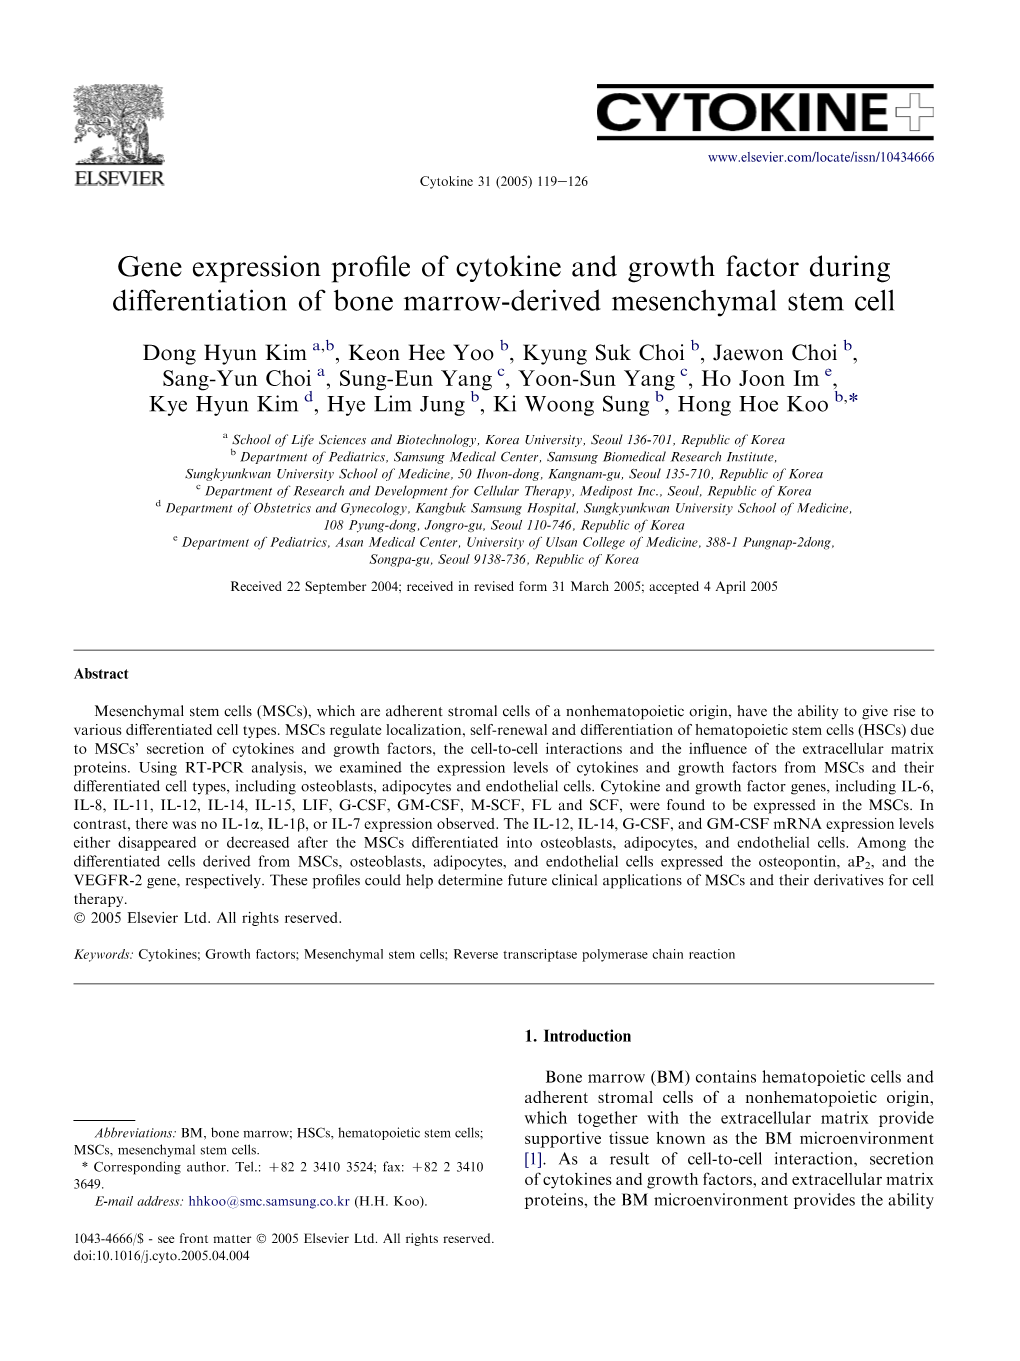 Gene Expression Profile of Cytokine and Growth Factor During